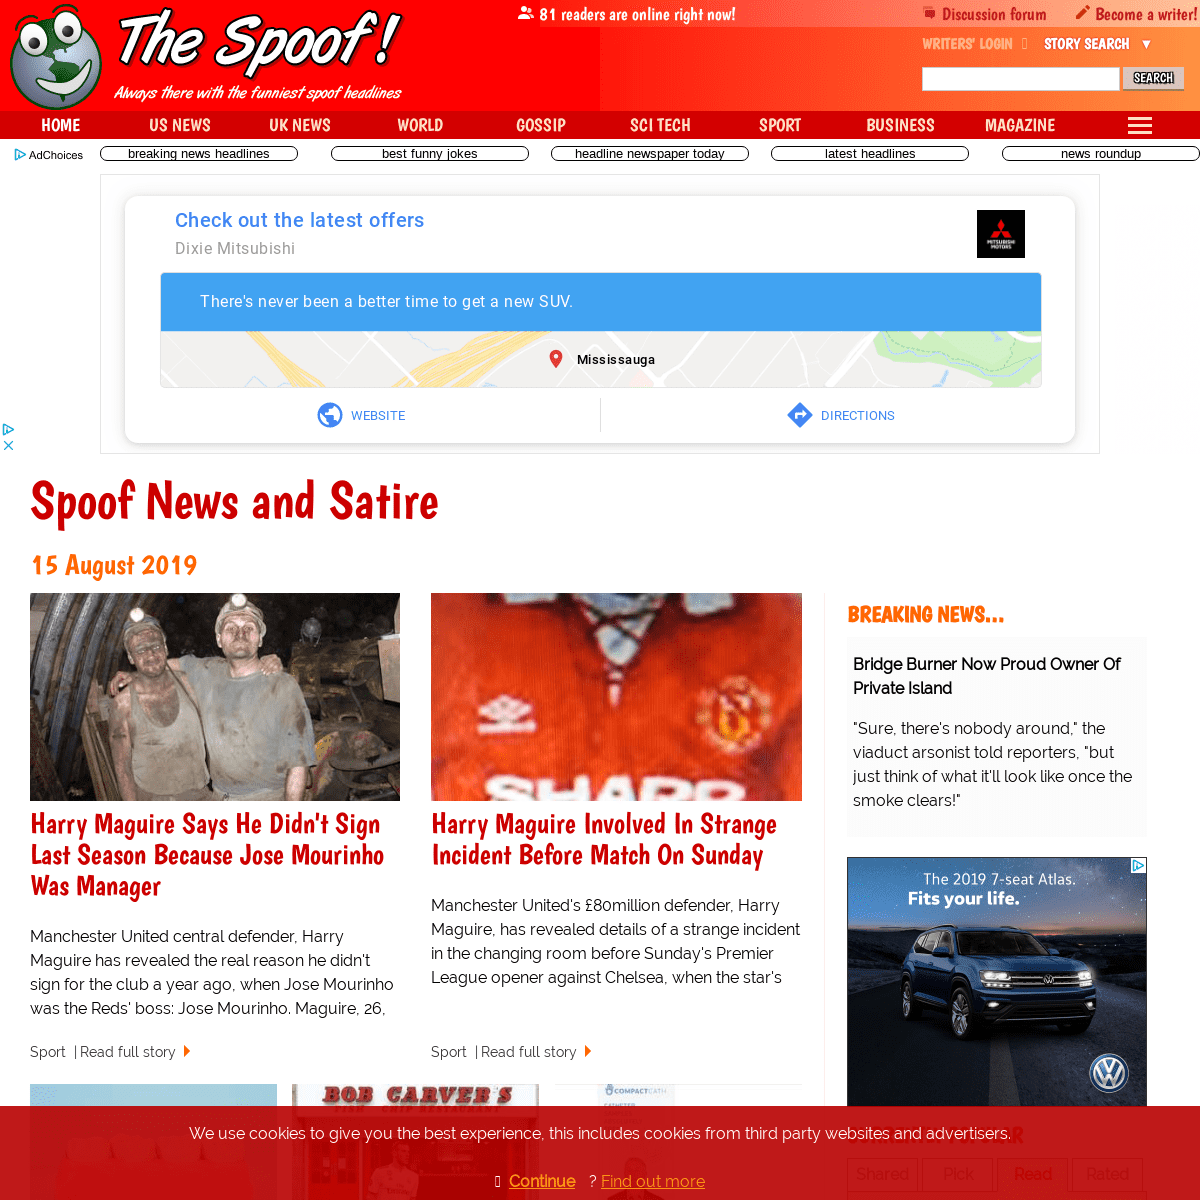 The Spoof - spoof news headlines, parody and political satire stories